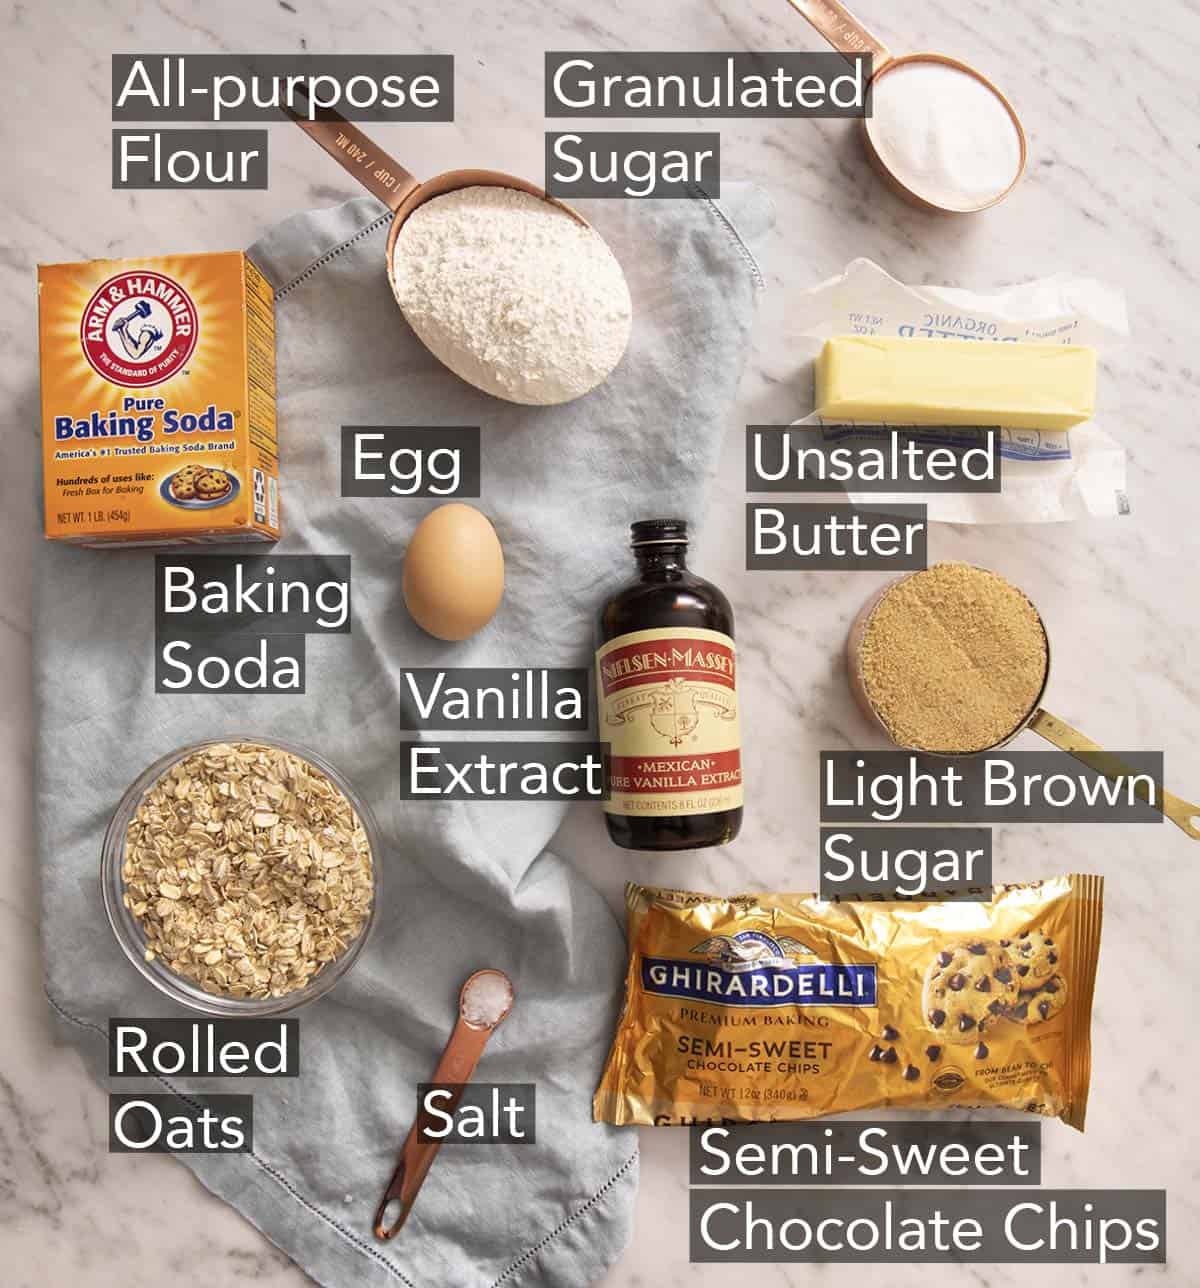 Ingredients to make oatmeal chocolate chip cookies on a marble counter.